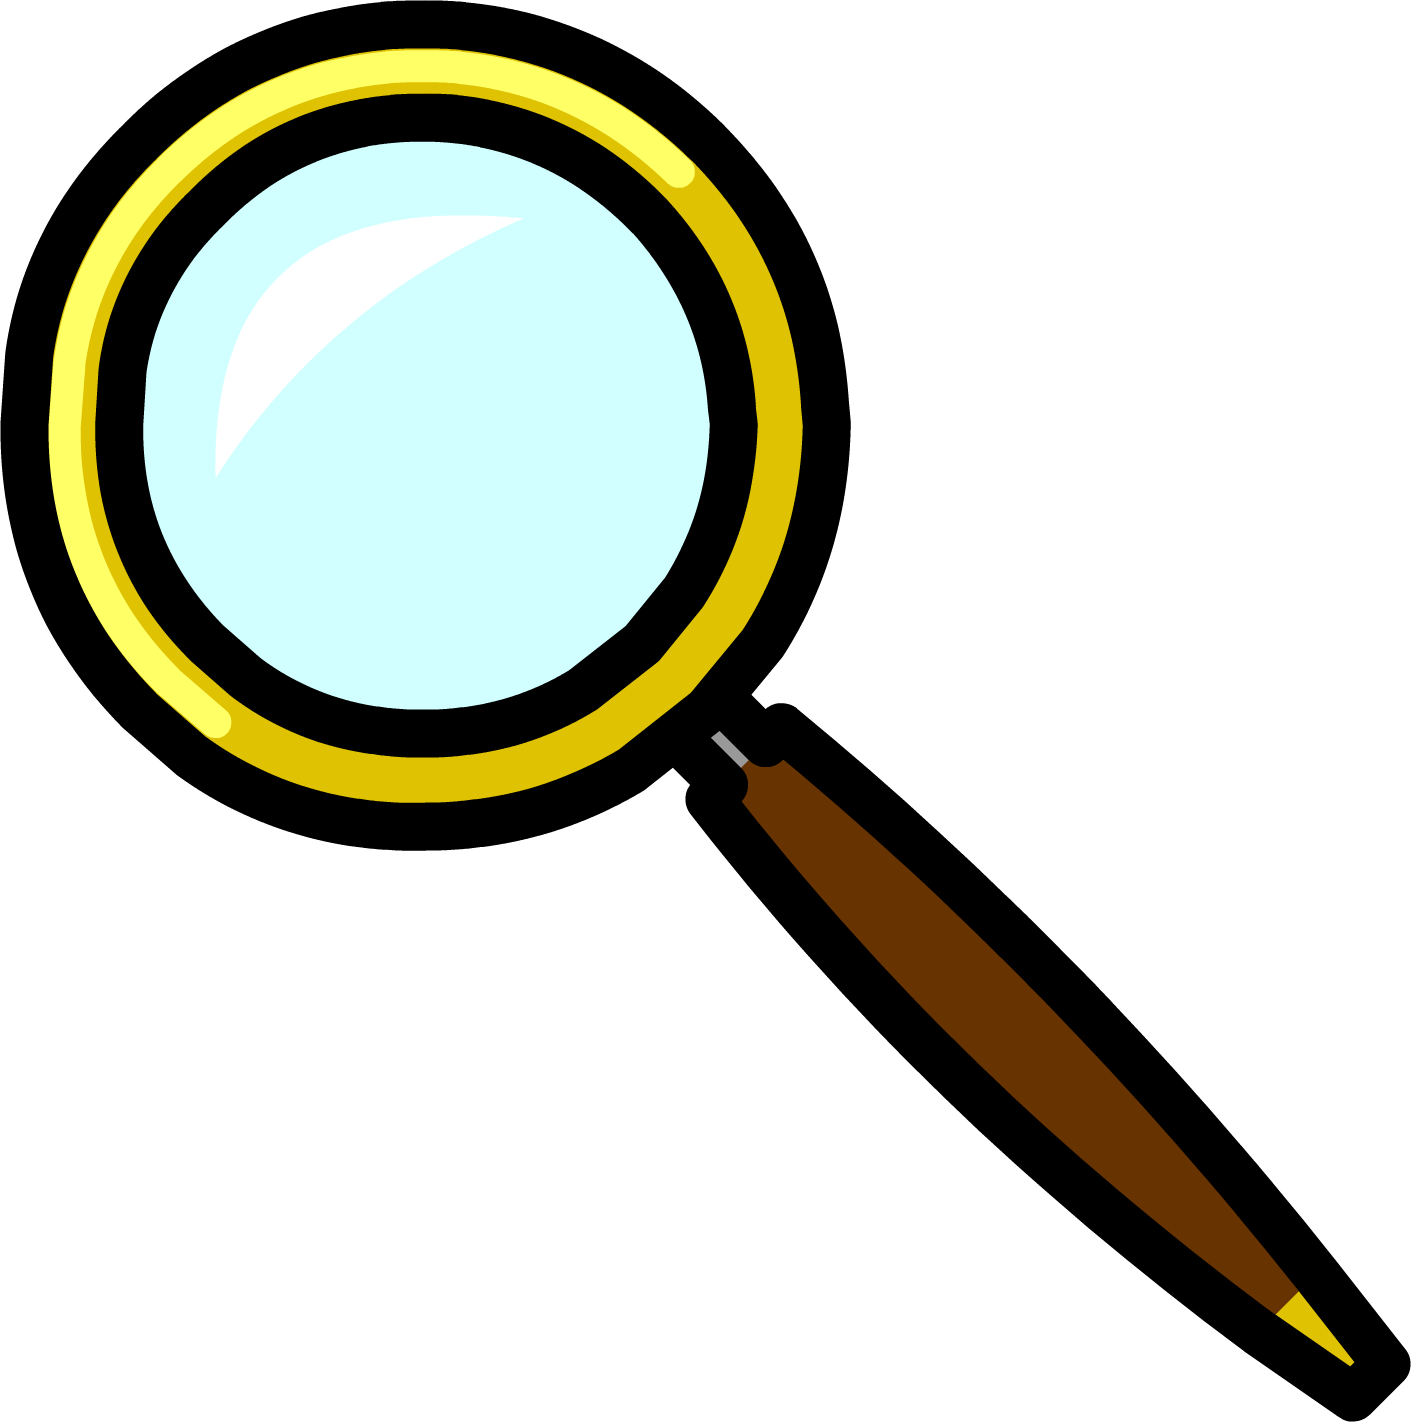 Magnifying Glass Pin - Club Penguin Magnifying Glass (1411x1422)